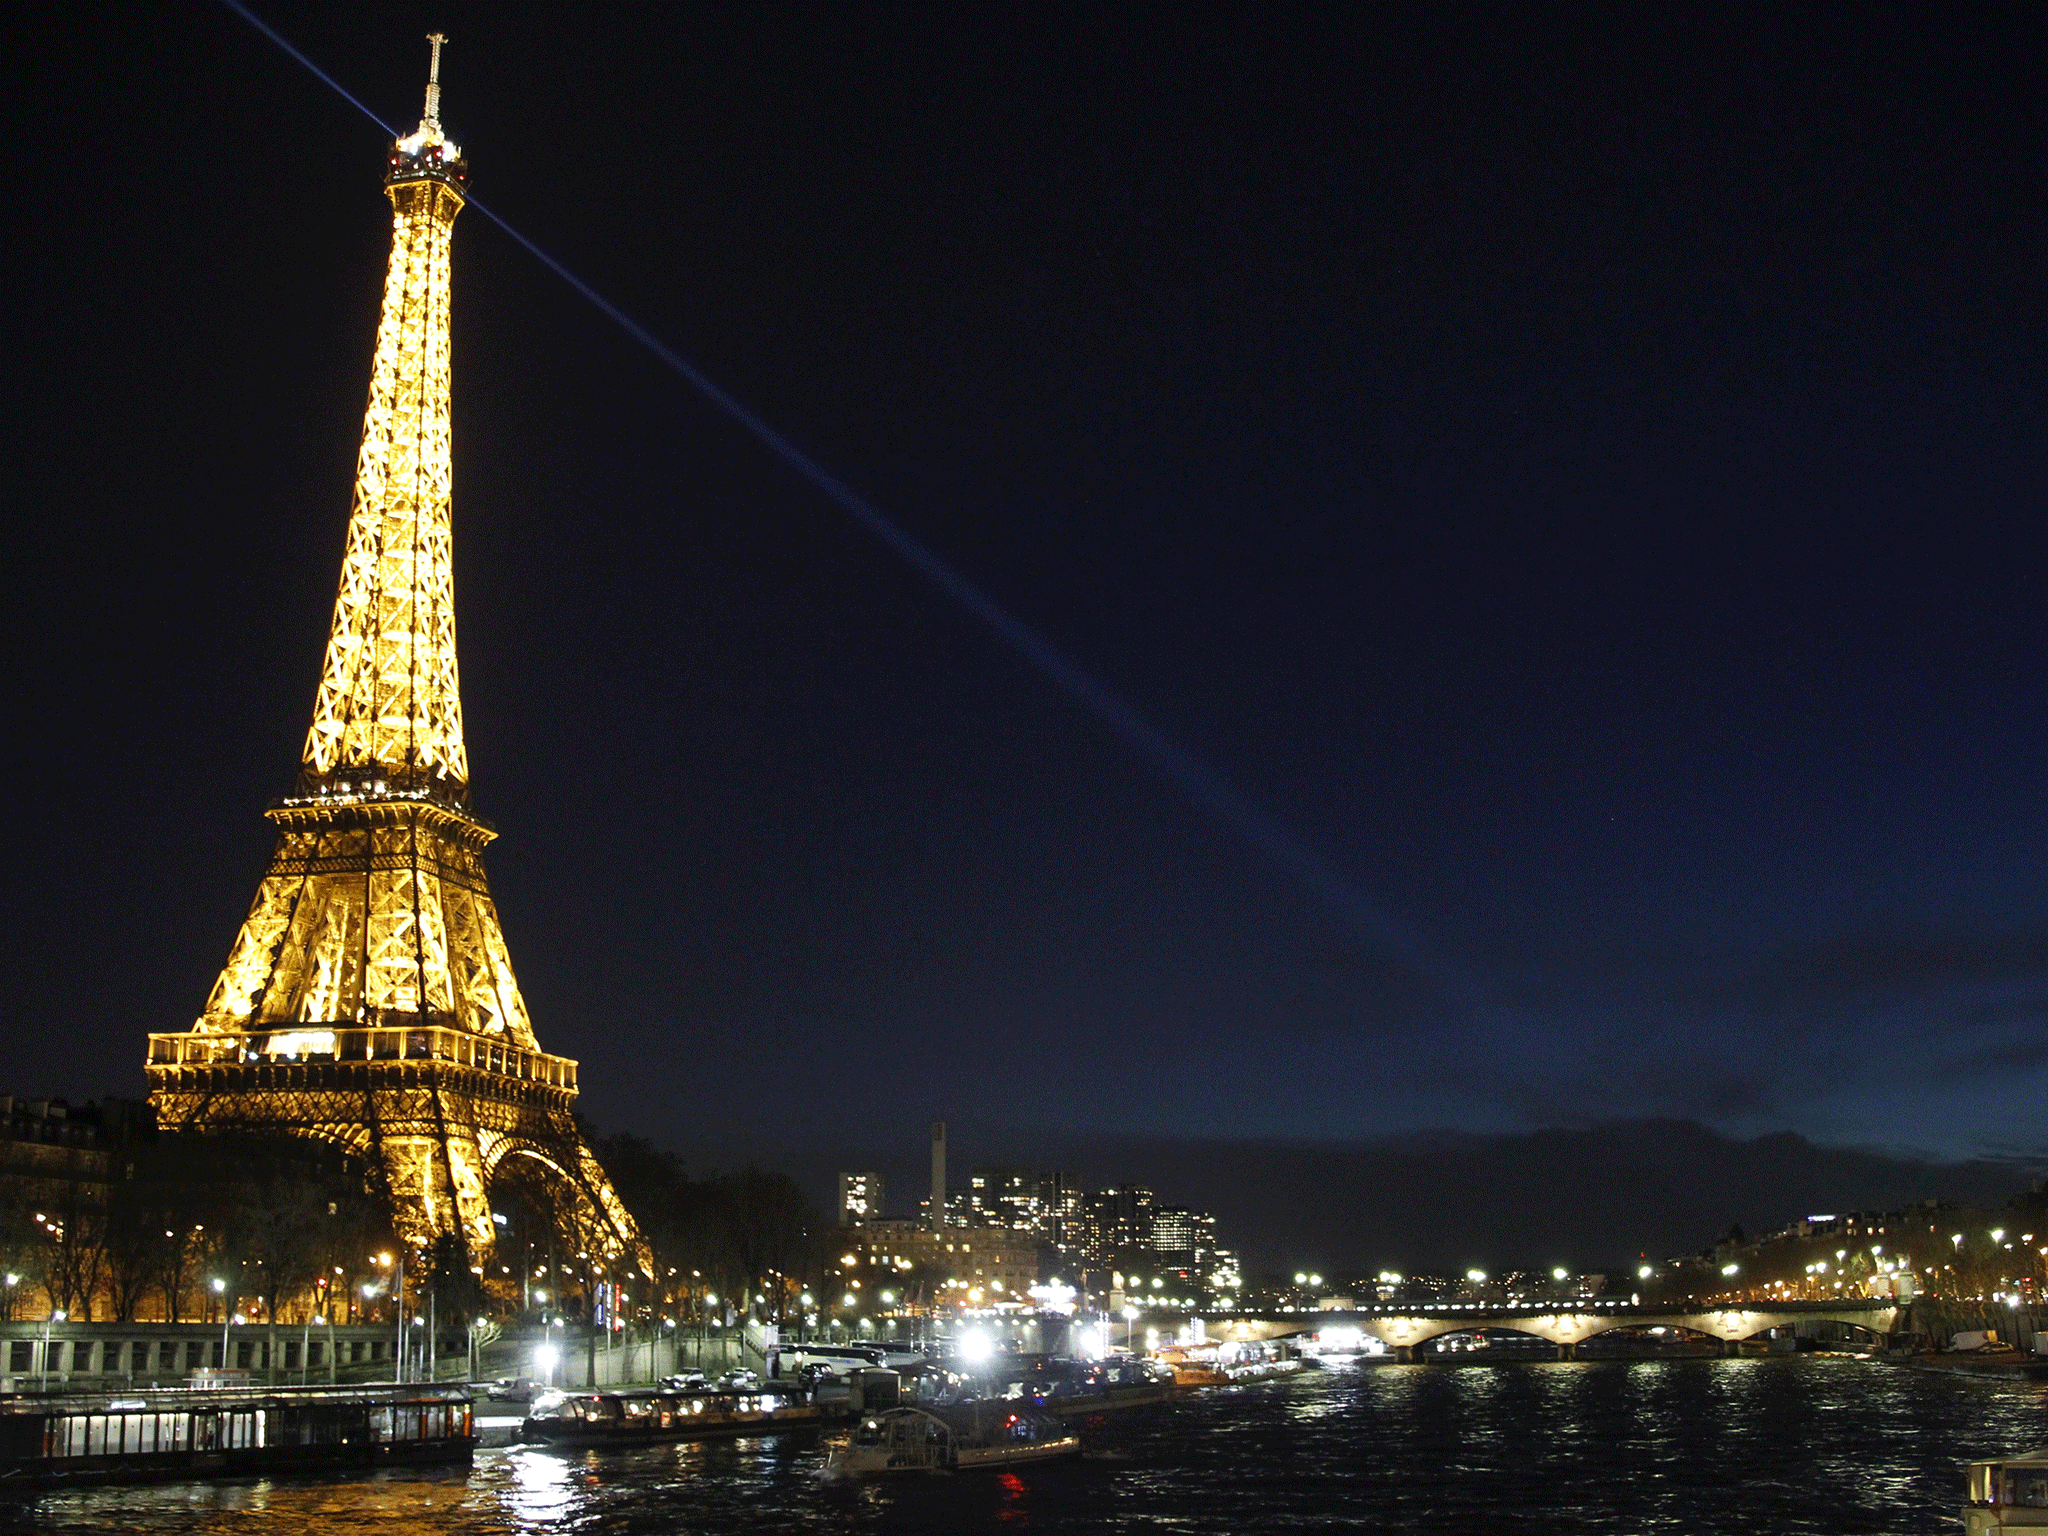 Paris turns off Eiffel Tower lights for Aleppo | The Independent